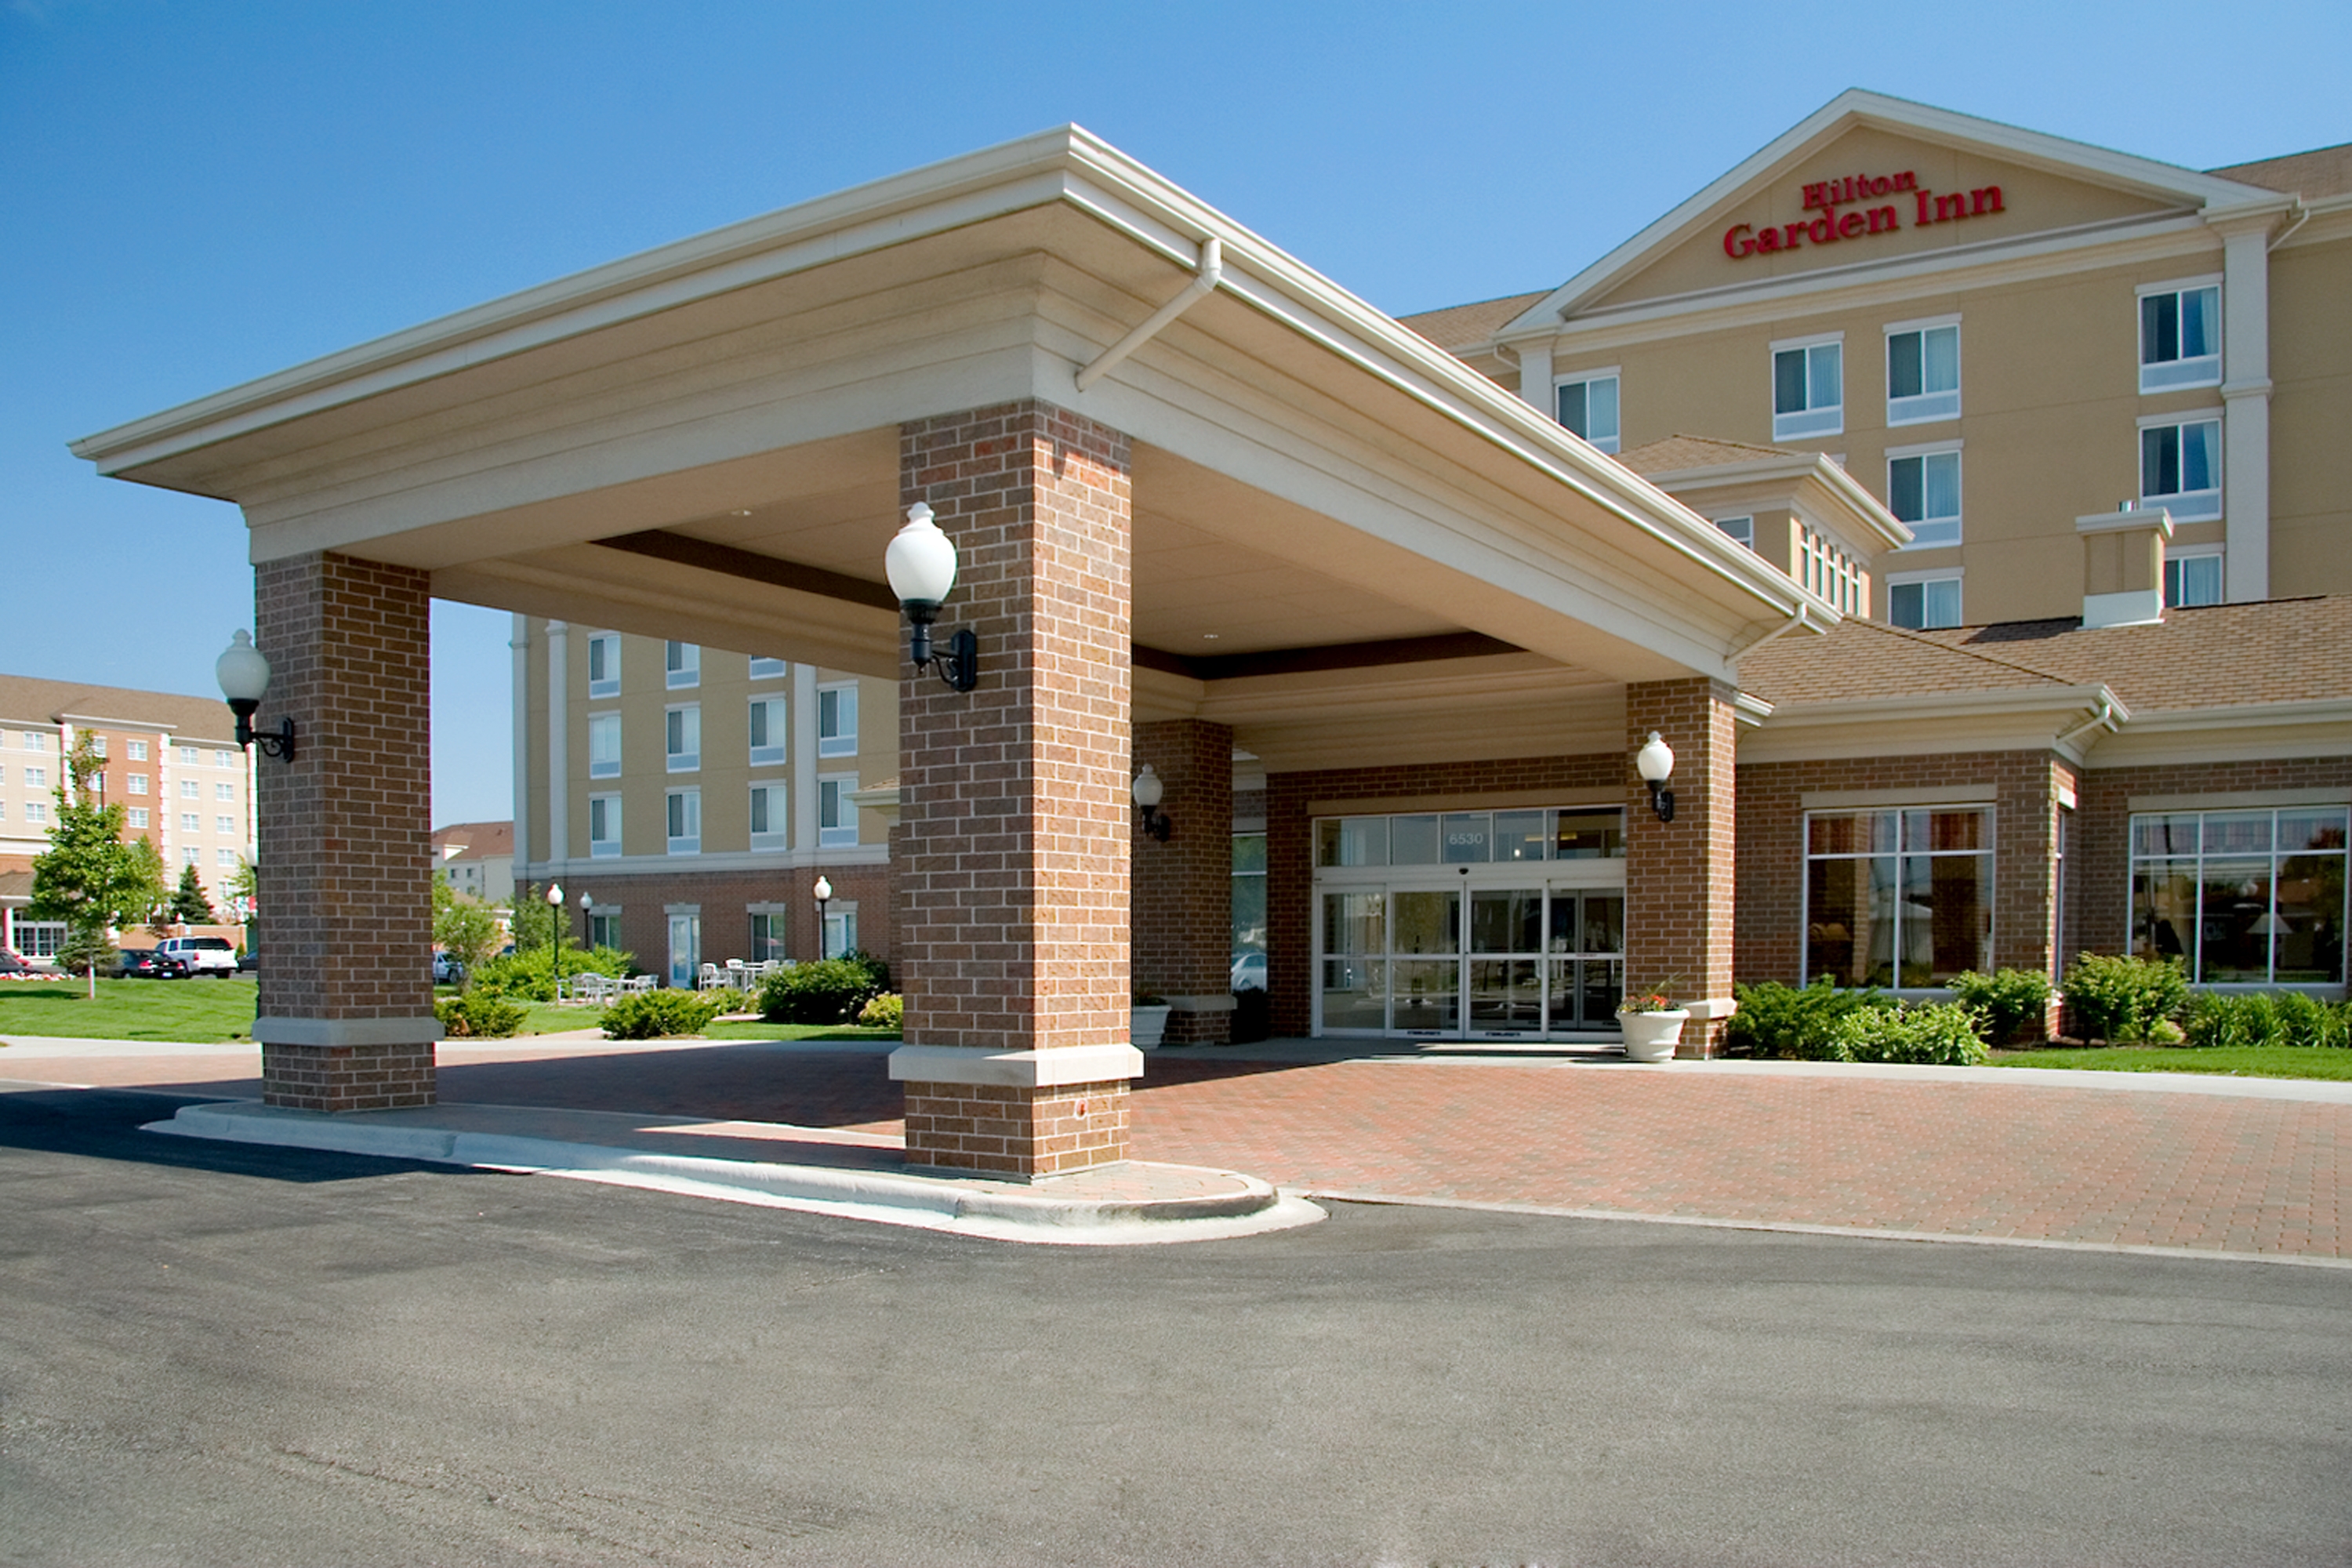 Daytime View of Hotel Exterior With Signage, Entrance, Landscaping, and Porte Cochère